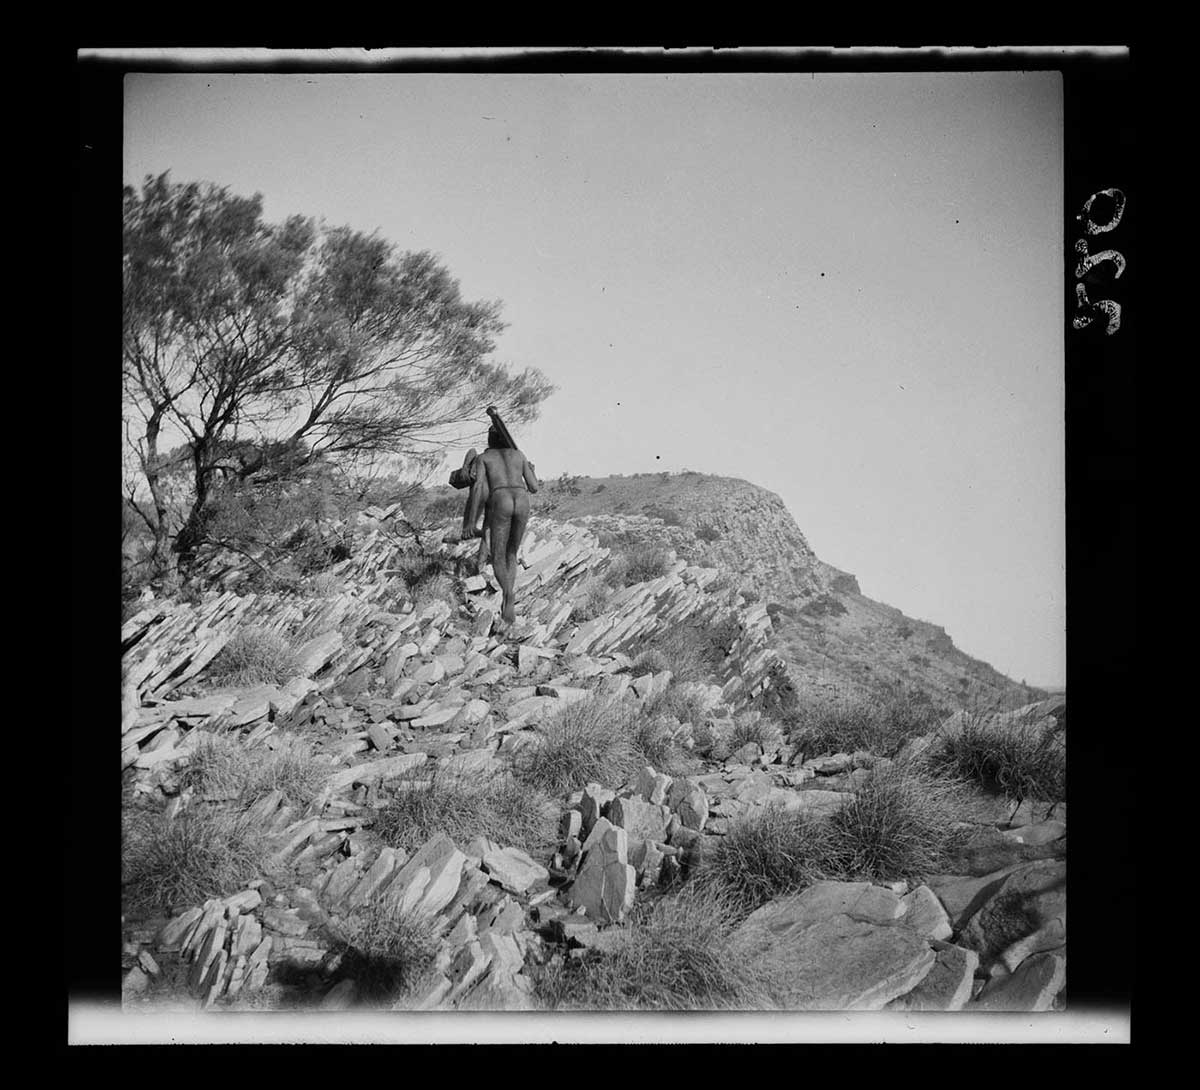 Two Aboriginal men, Artuatama and Mingerinnya, carrying a theodolite to the summit of Mount McCulloch (Nangorru), Petermann Ranges, Northern Territory 1926. The two men are in the centre of the image, with their backs to the camera as they walk up to the summit. The man closest to the camera carries what appears to be a folding stand on his right shoulder. He carries what appears to be a Aboriginal tool or weapon in his left hand. He partially obscures the man walking in front of him. This man is bending over, perhaps as he negotiates a patch of loose rocks. The ground around them is covered in slate rock formations leaning over from left to right. The summit of Mount McCulloch is visible in the centre distance; the mount's flank drops away on the right hand side.  - click to view larger image